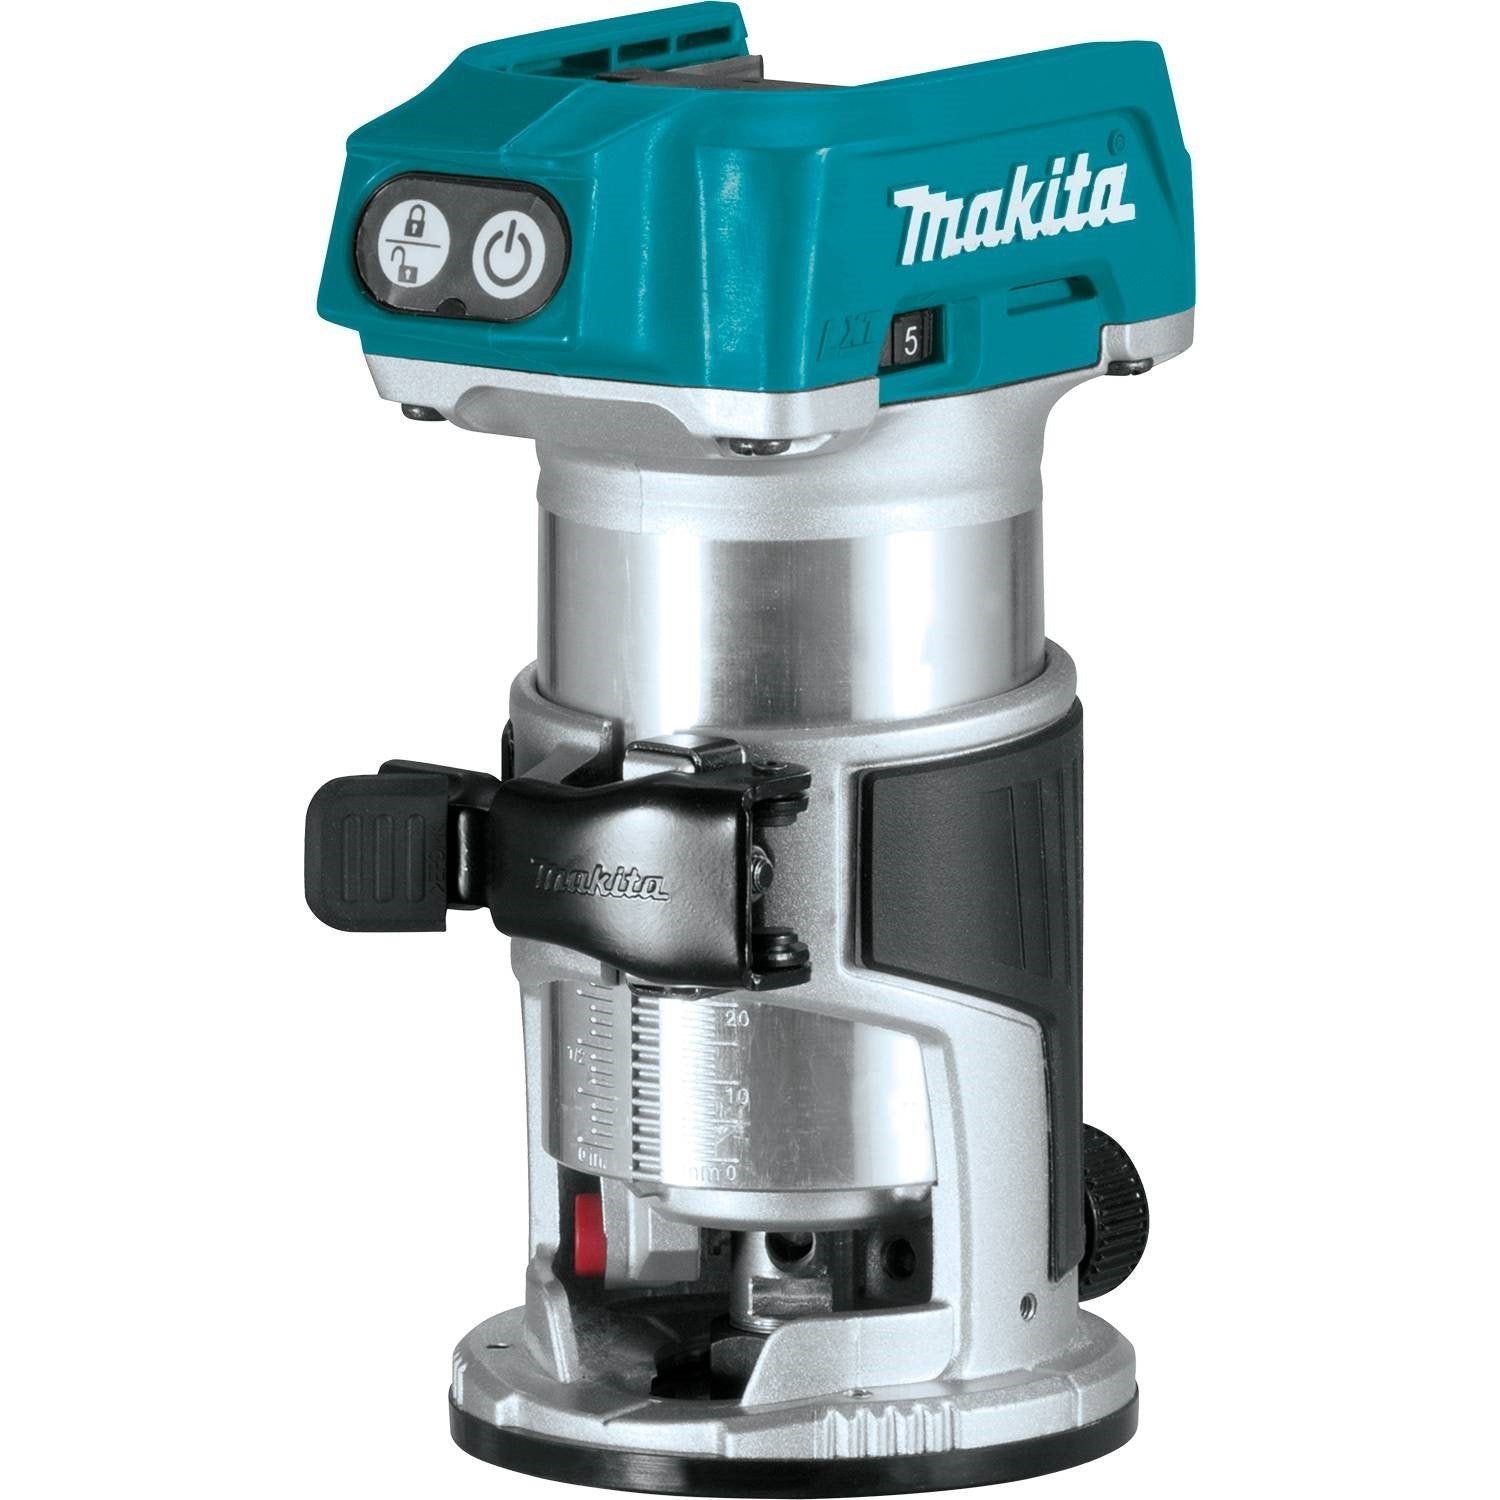 Makita DRT50ZX4 18V LXT Brushless Router (Tool only) W/Dust Extraction